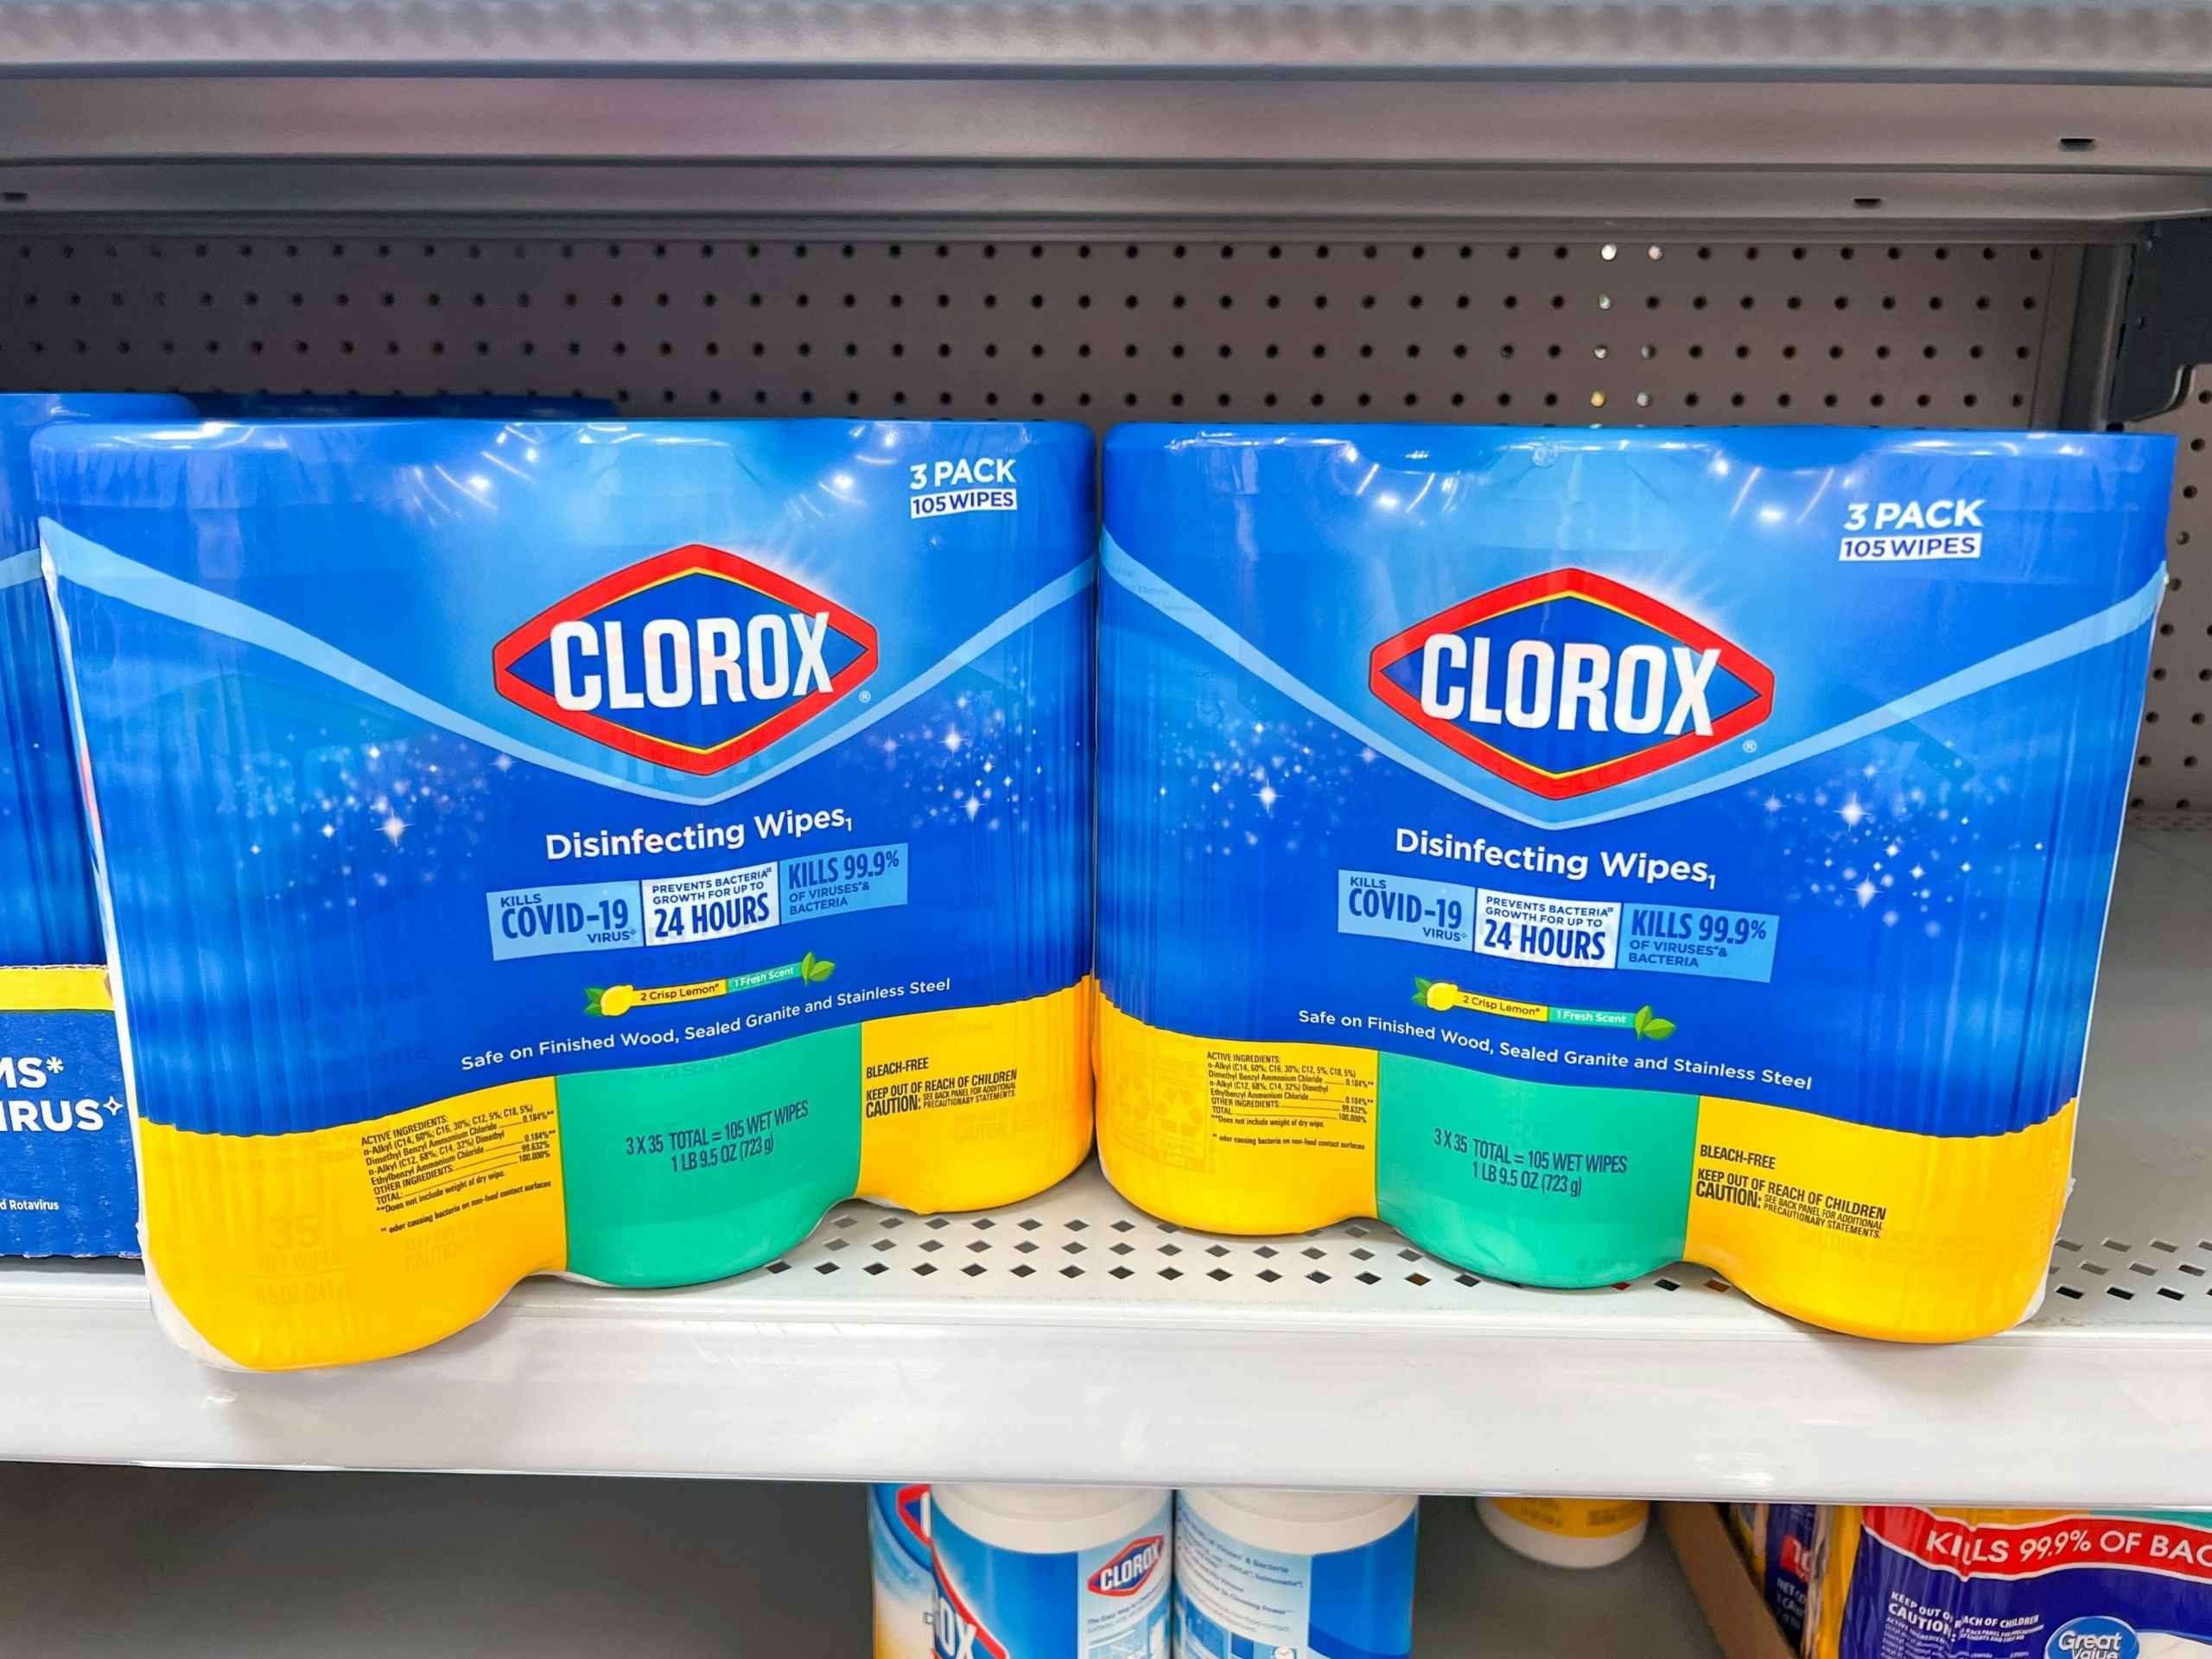 Two Clorox Disinfecting Wipes multi-pack products on shelf at Walmart.